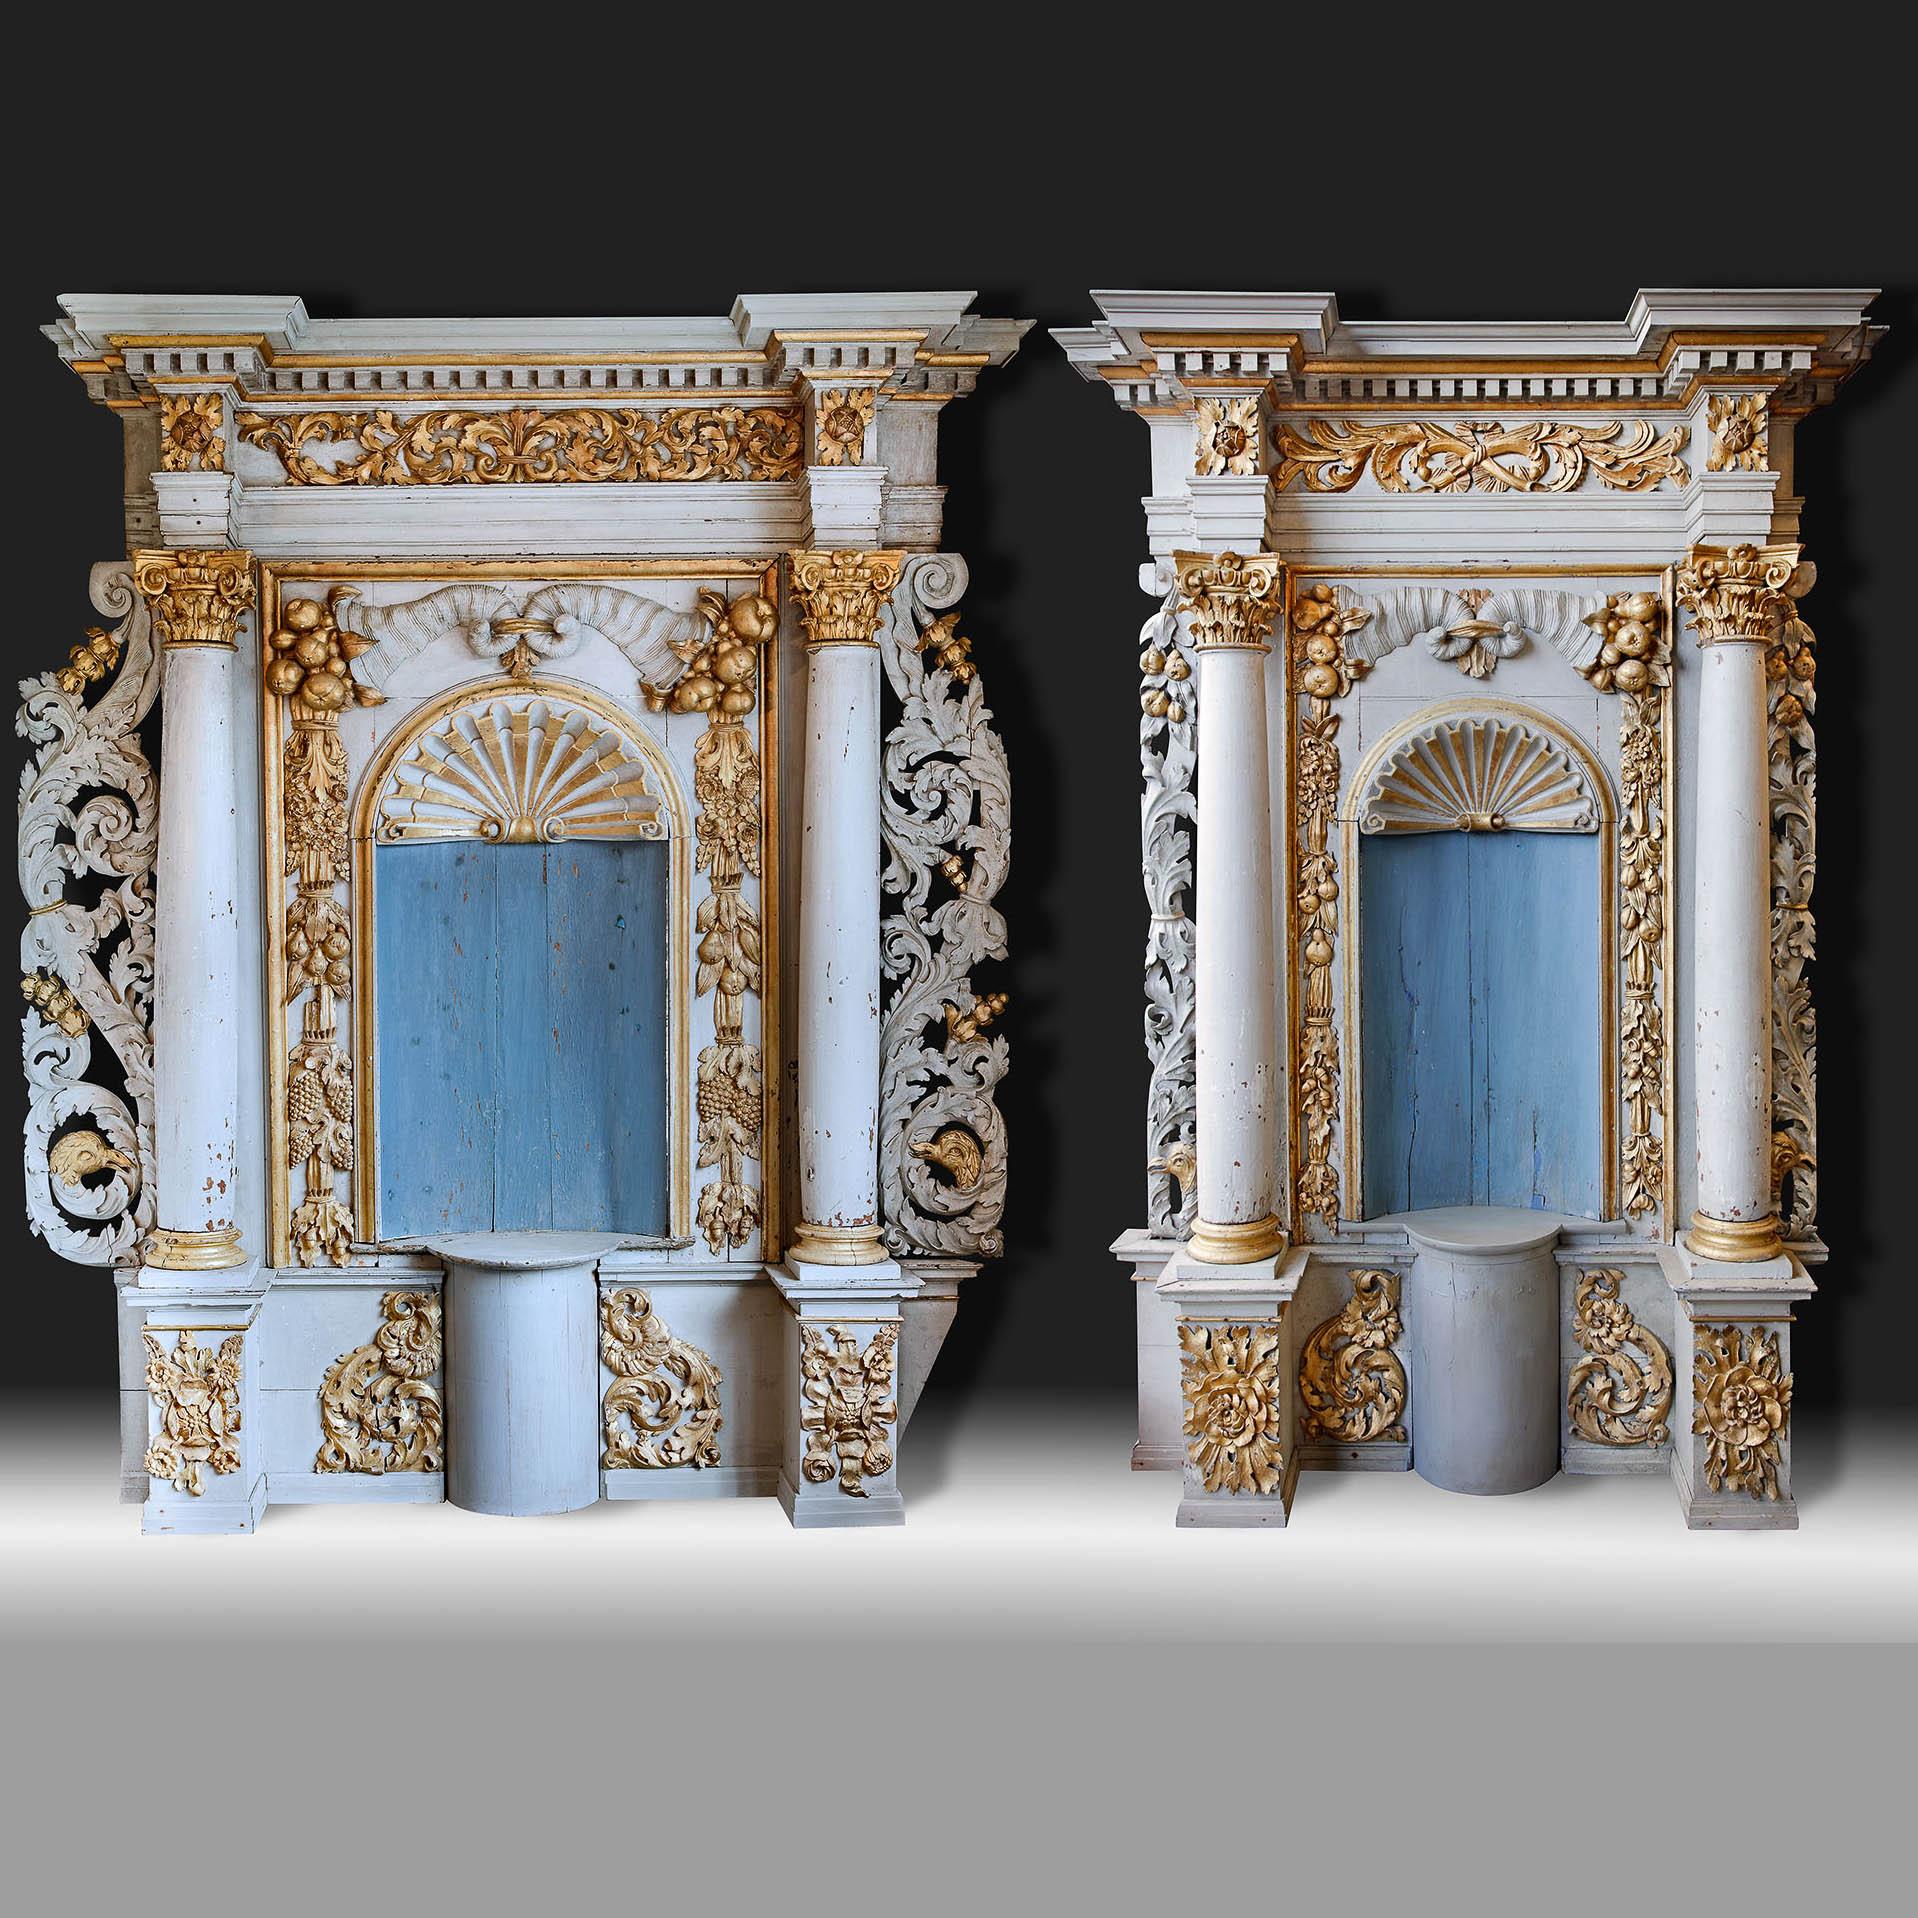 Two early seventeenth-century French chapel niches made of carved oak, gilded with gold leaf and executed in the classicist design language.

The niches are each provided with a pair of columns with capitals decorated in the richest Composite style